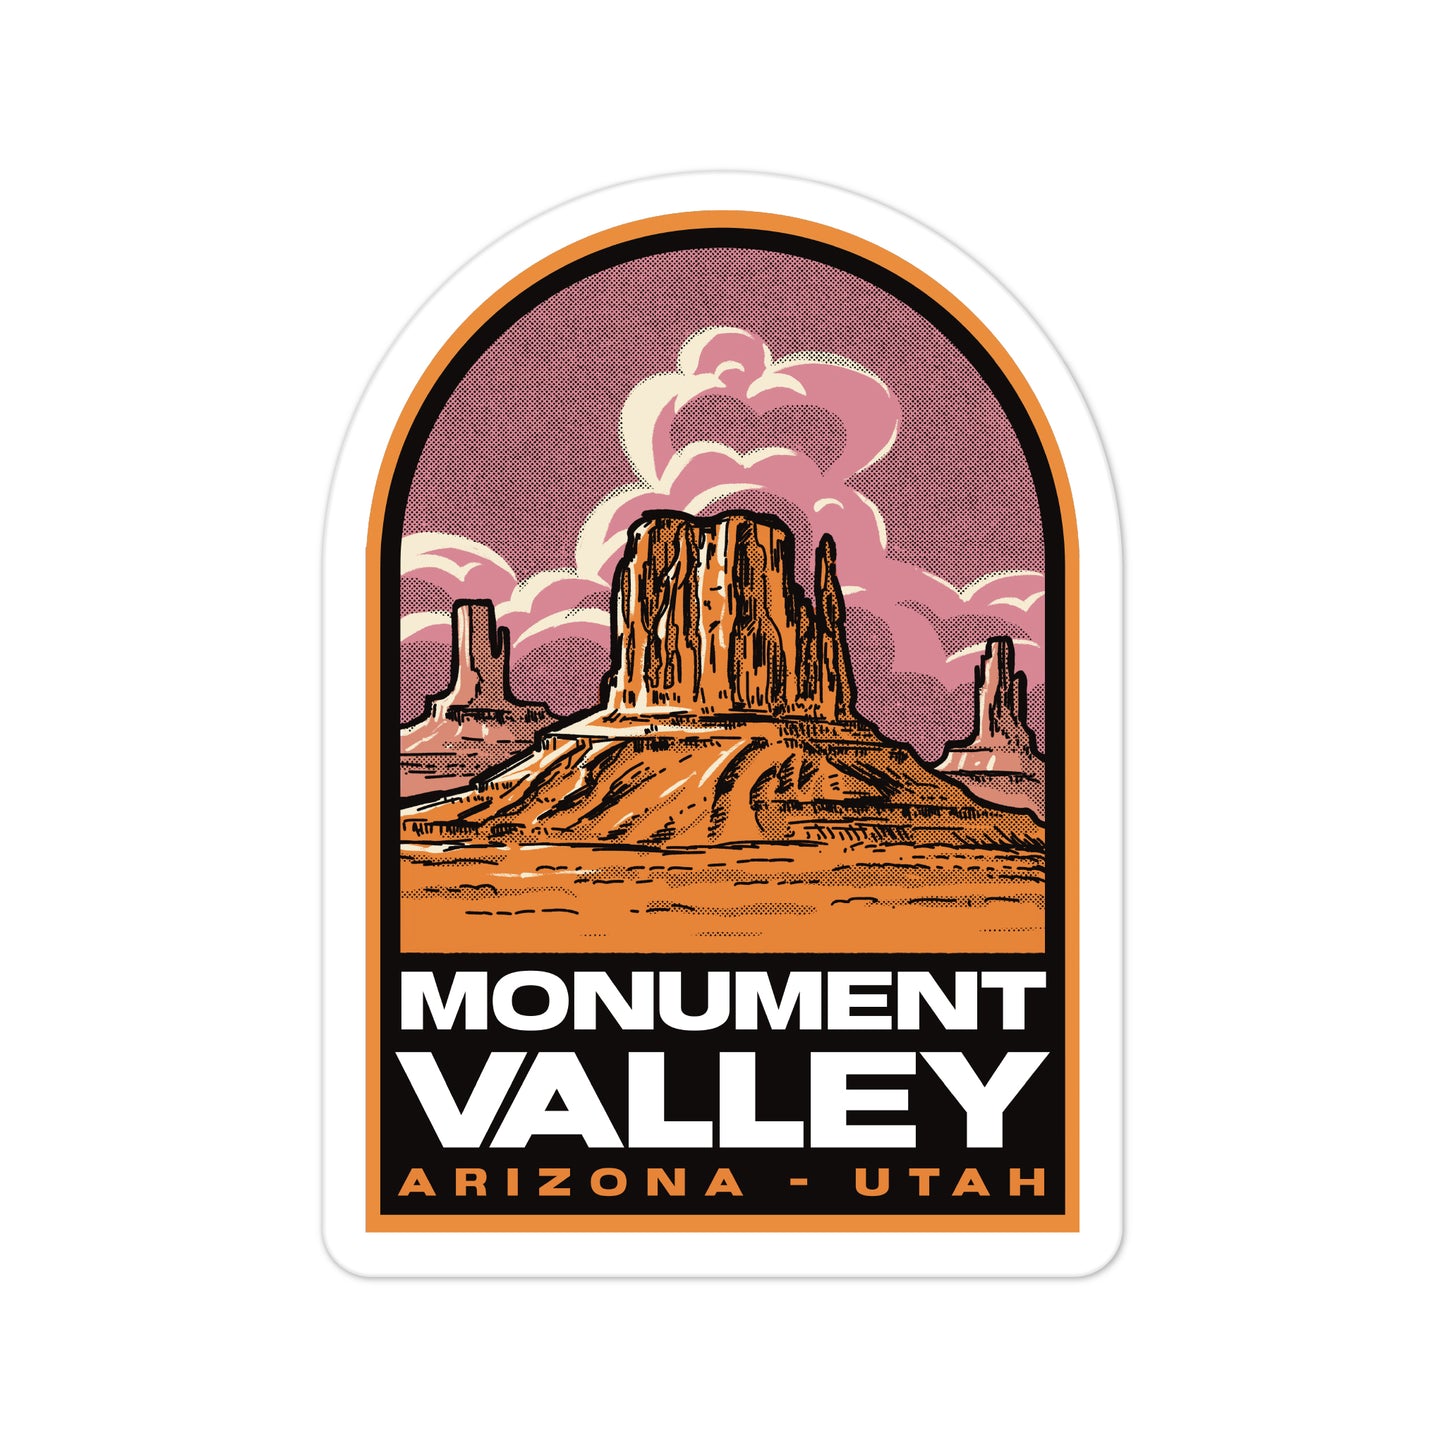 A sticker of Monument Valley